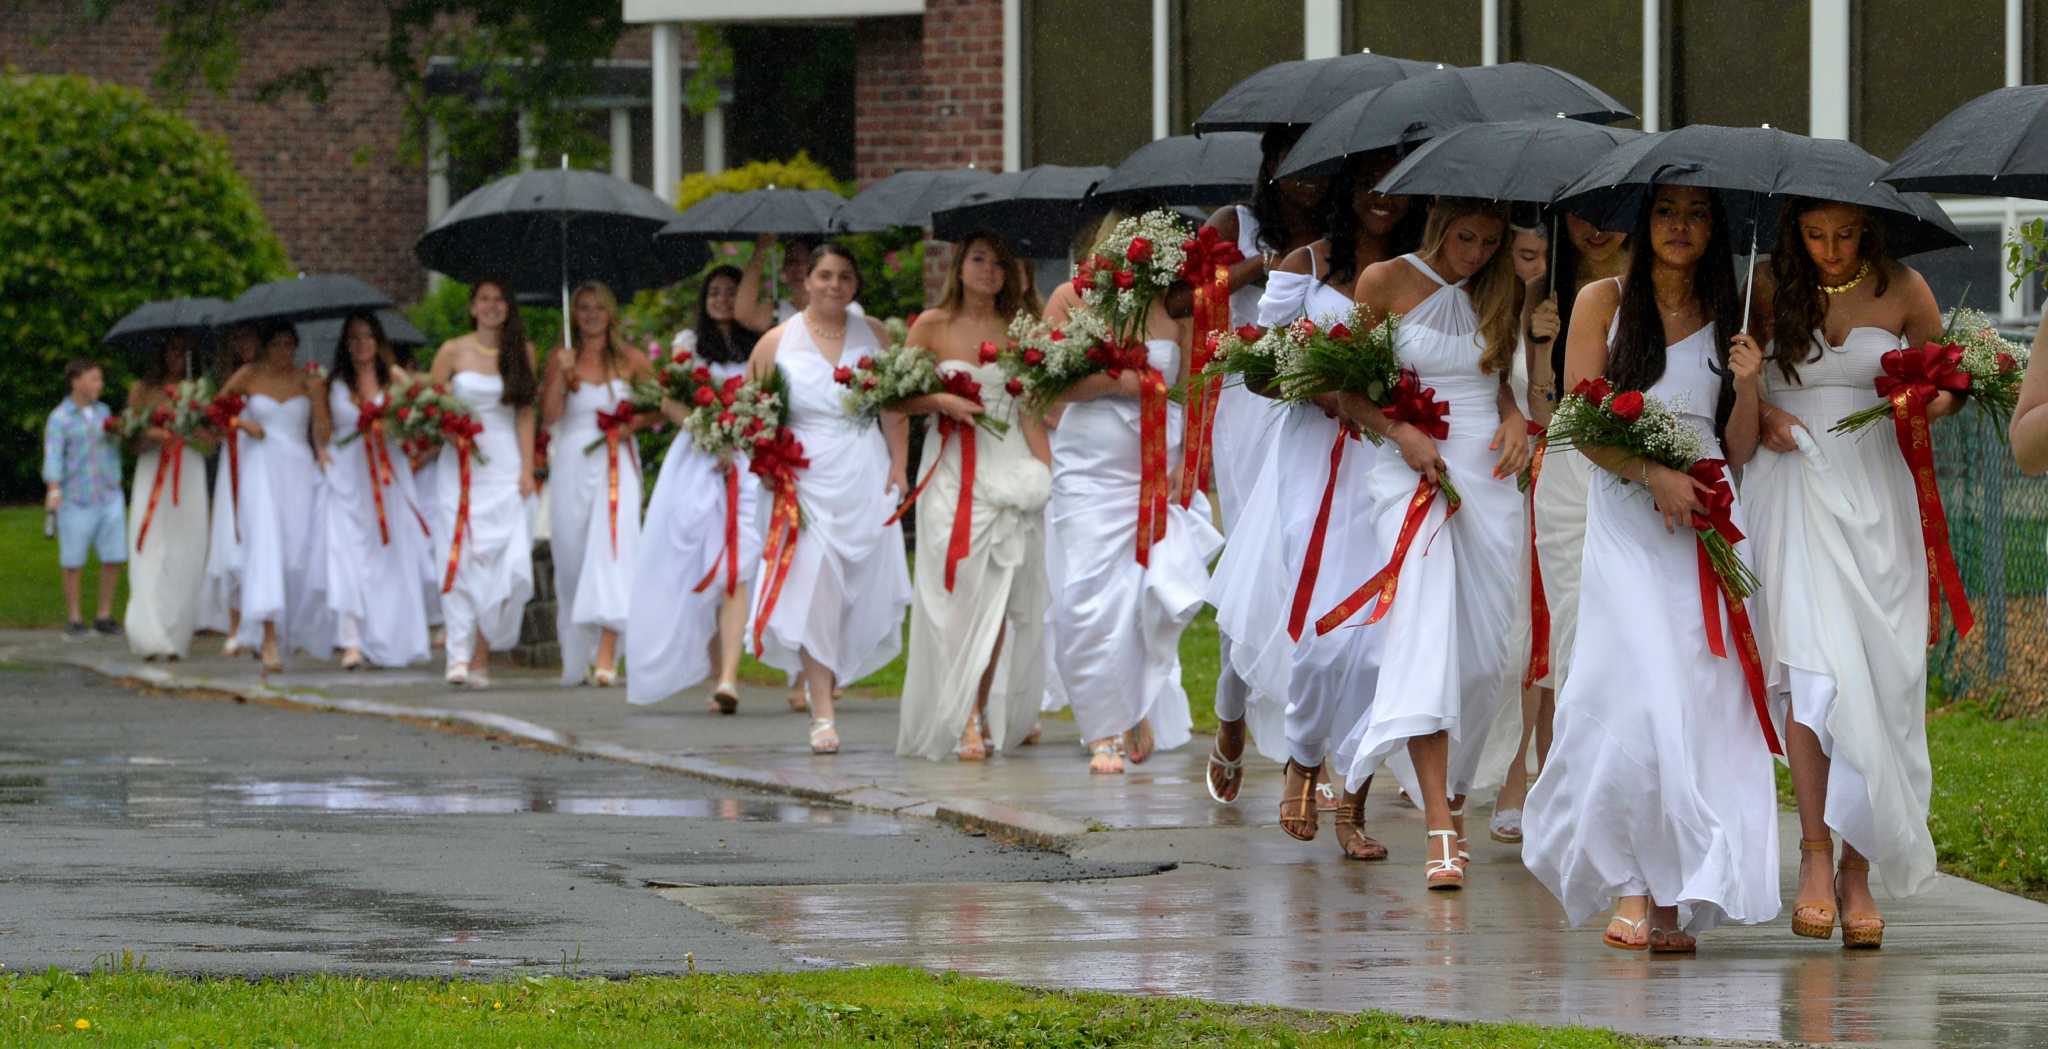 Albany Academy for Girls marks 200th commencement Times Union